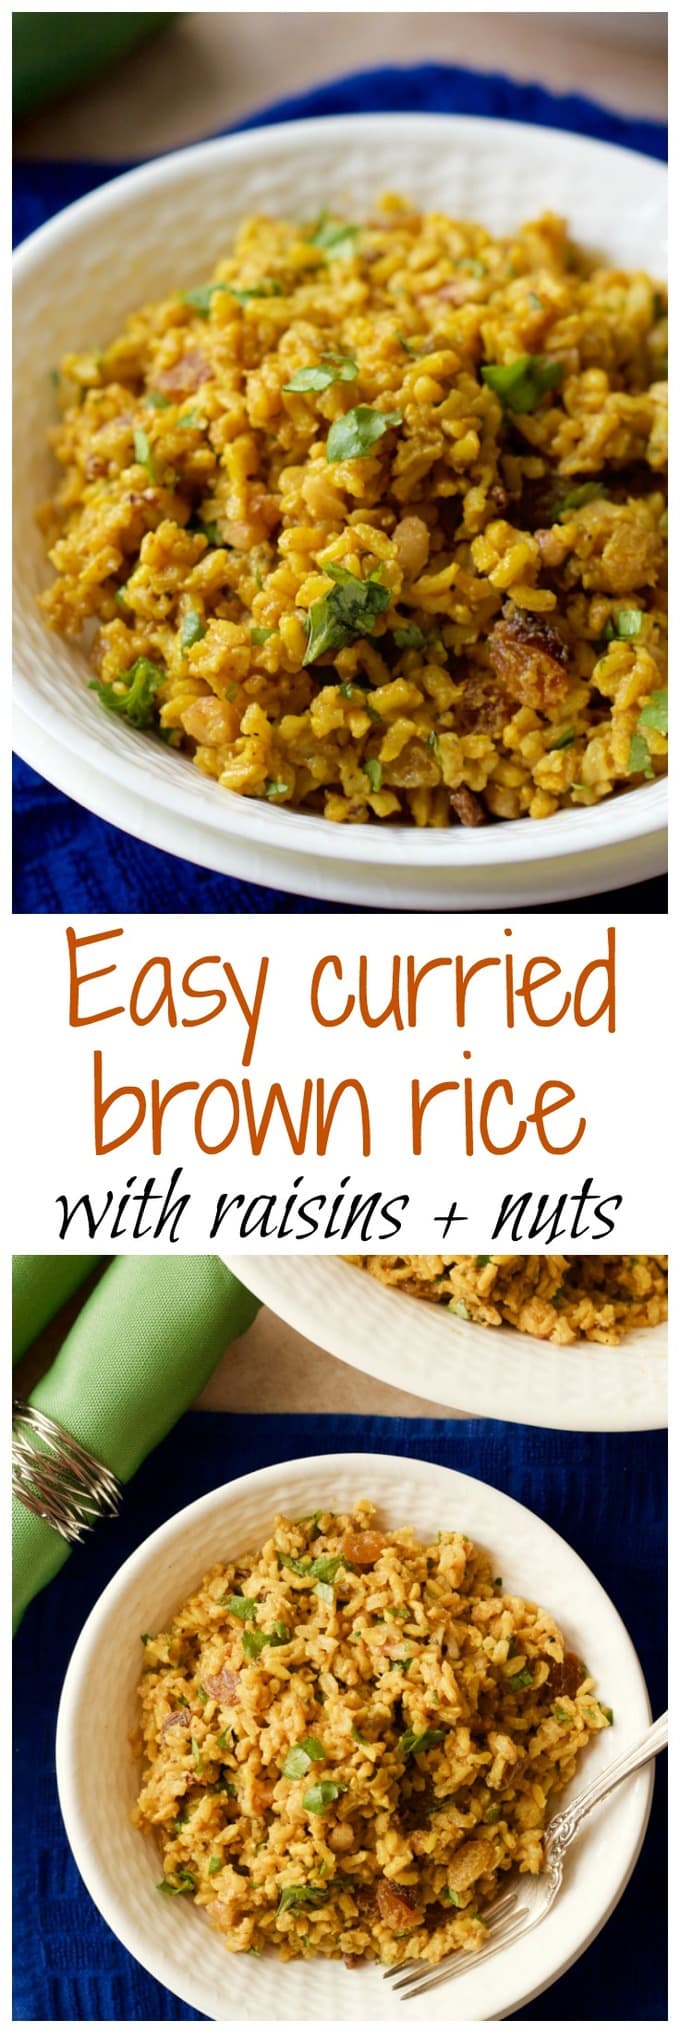 Curried brown rice salad photos in a collage with a text box in the middle